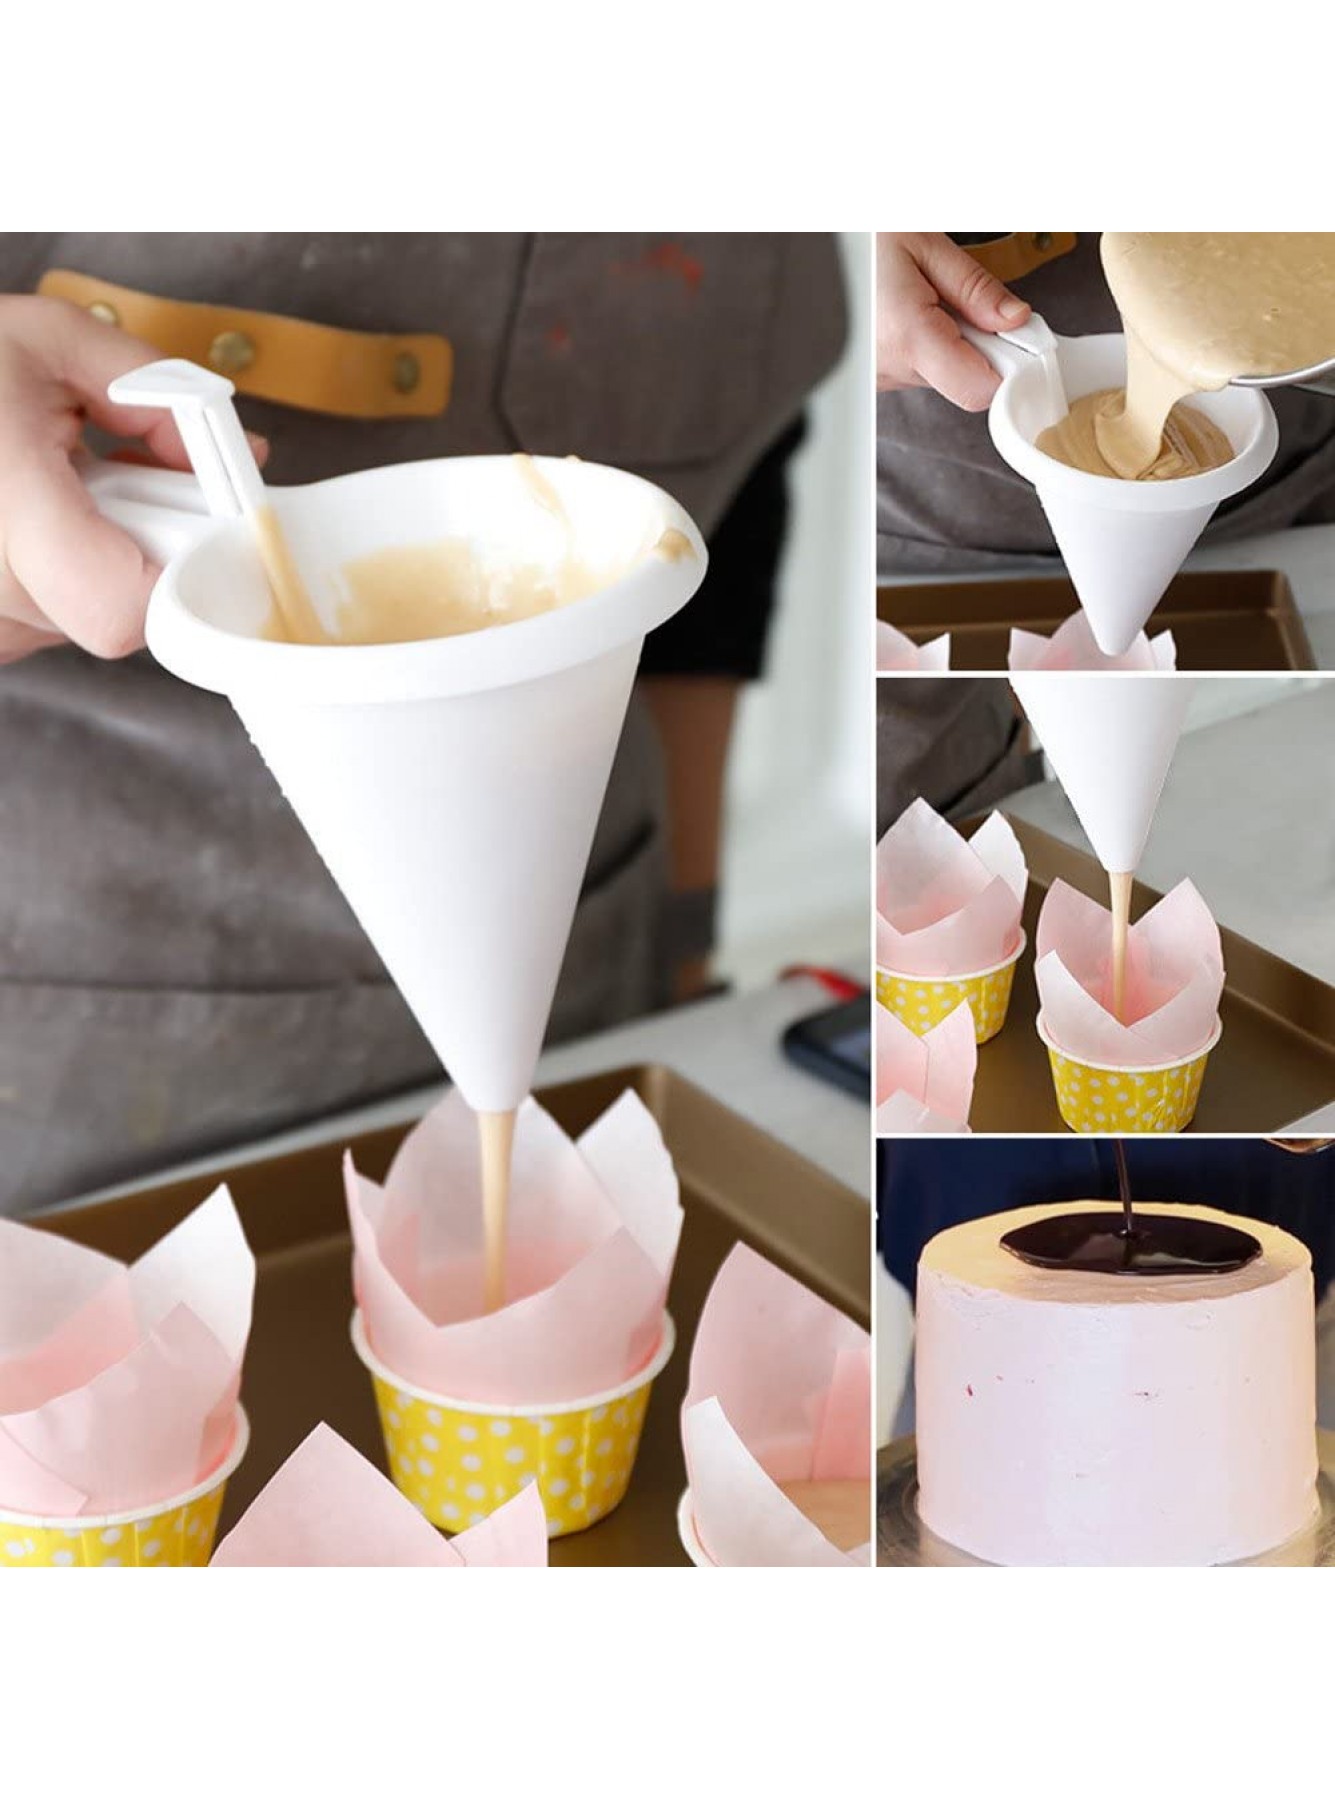 TheRang Adjustable Chocolate Funnel for Baking Cake Decorating Tools Kitchen B07Q3BN3M2